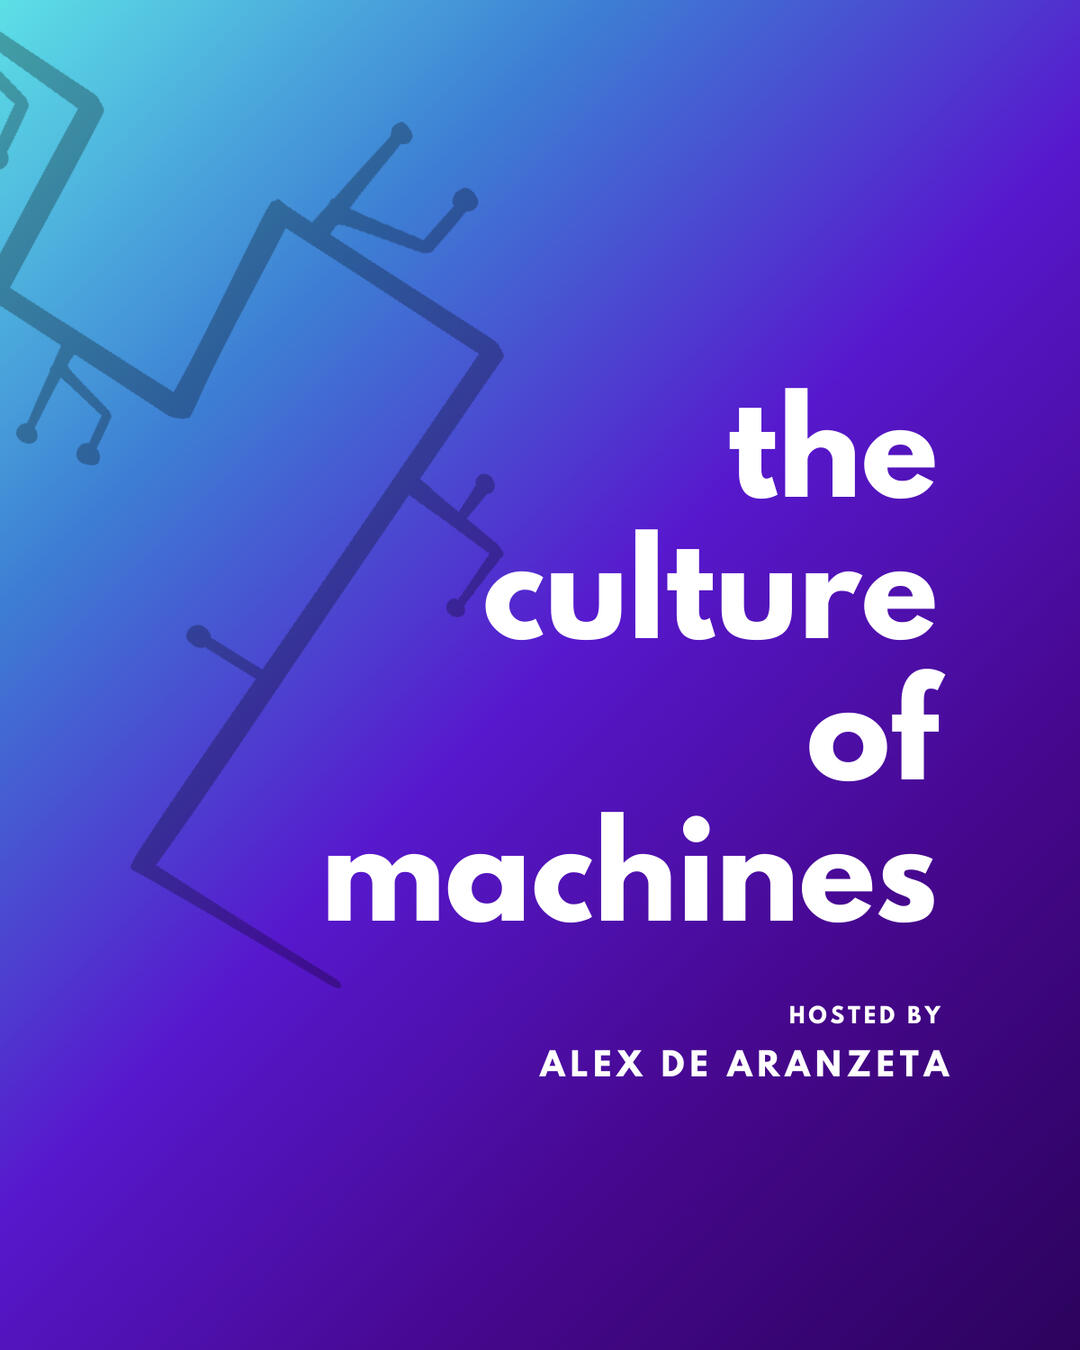 The Culture of Machines